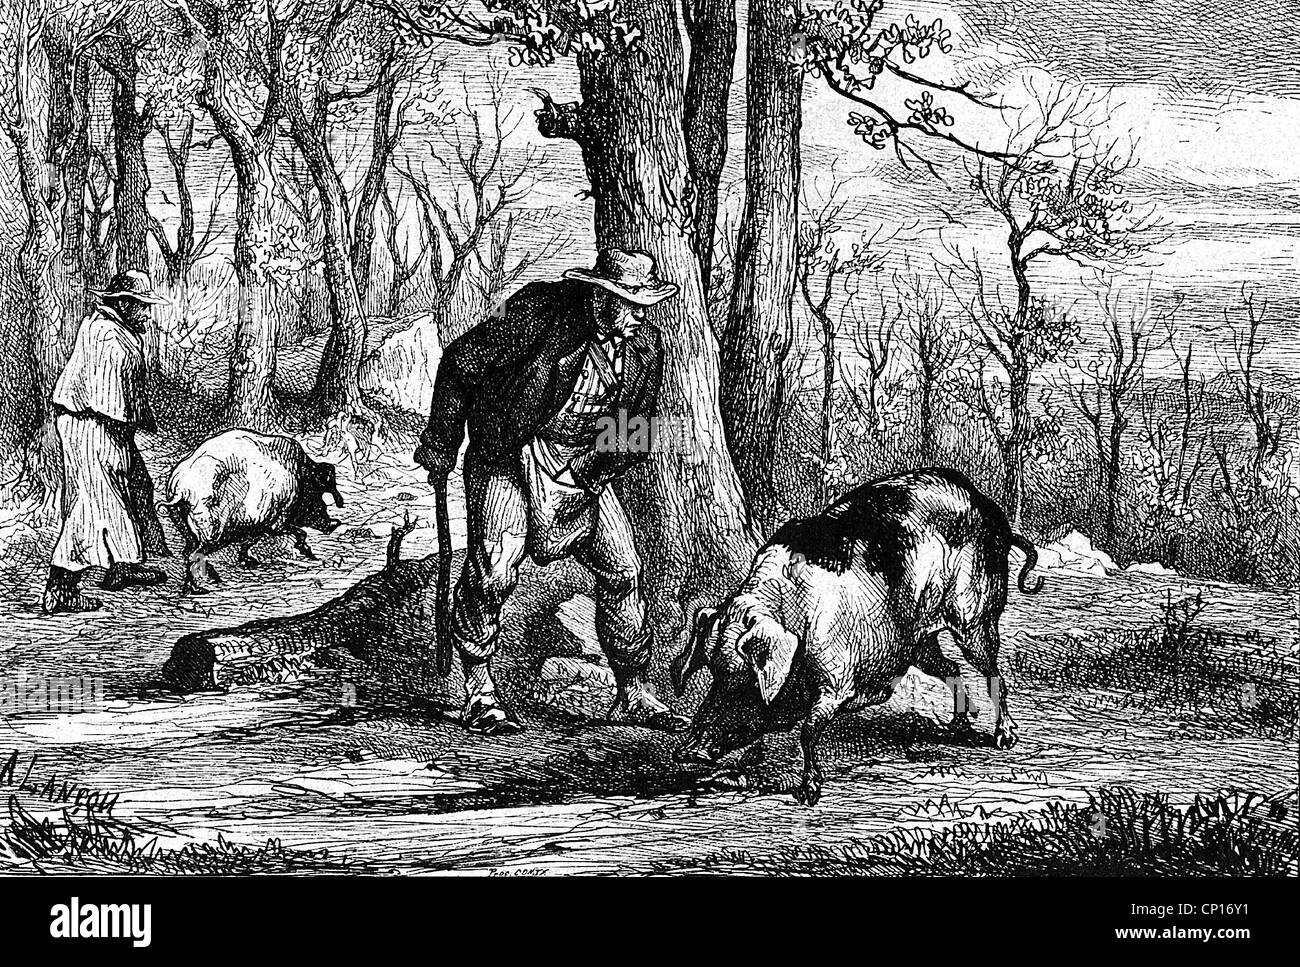 zoology, pig, truffle pig during truffle search in the woods, wood engraving according to Auguste Lancon, (1836 - 1887 ), truffle searcher, pig, swine, pigs, swines, food, foodstuff, France, delicacy, delicacies, mushroom, mushrooms, truffle, truffles, search, hunt, in search of, forest, forests, historic, historical, 19th century, people, Additional-Rights-Clearences-Not Available Stock Photo